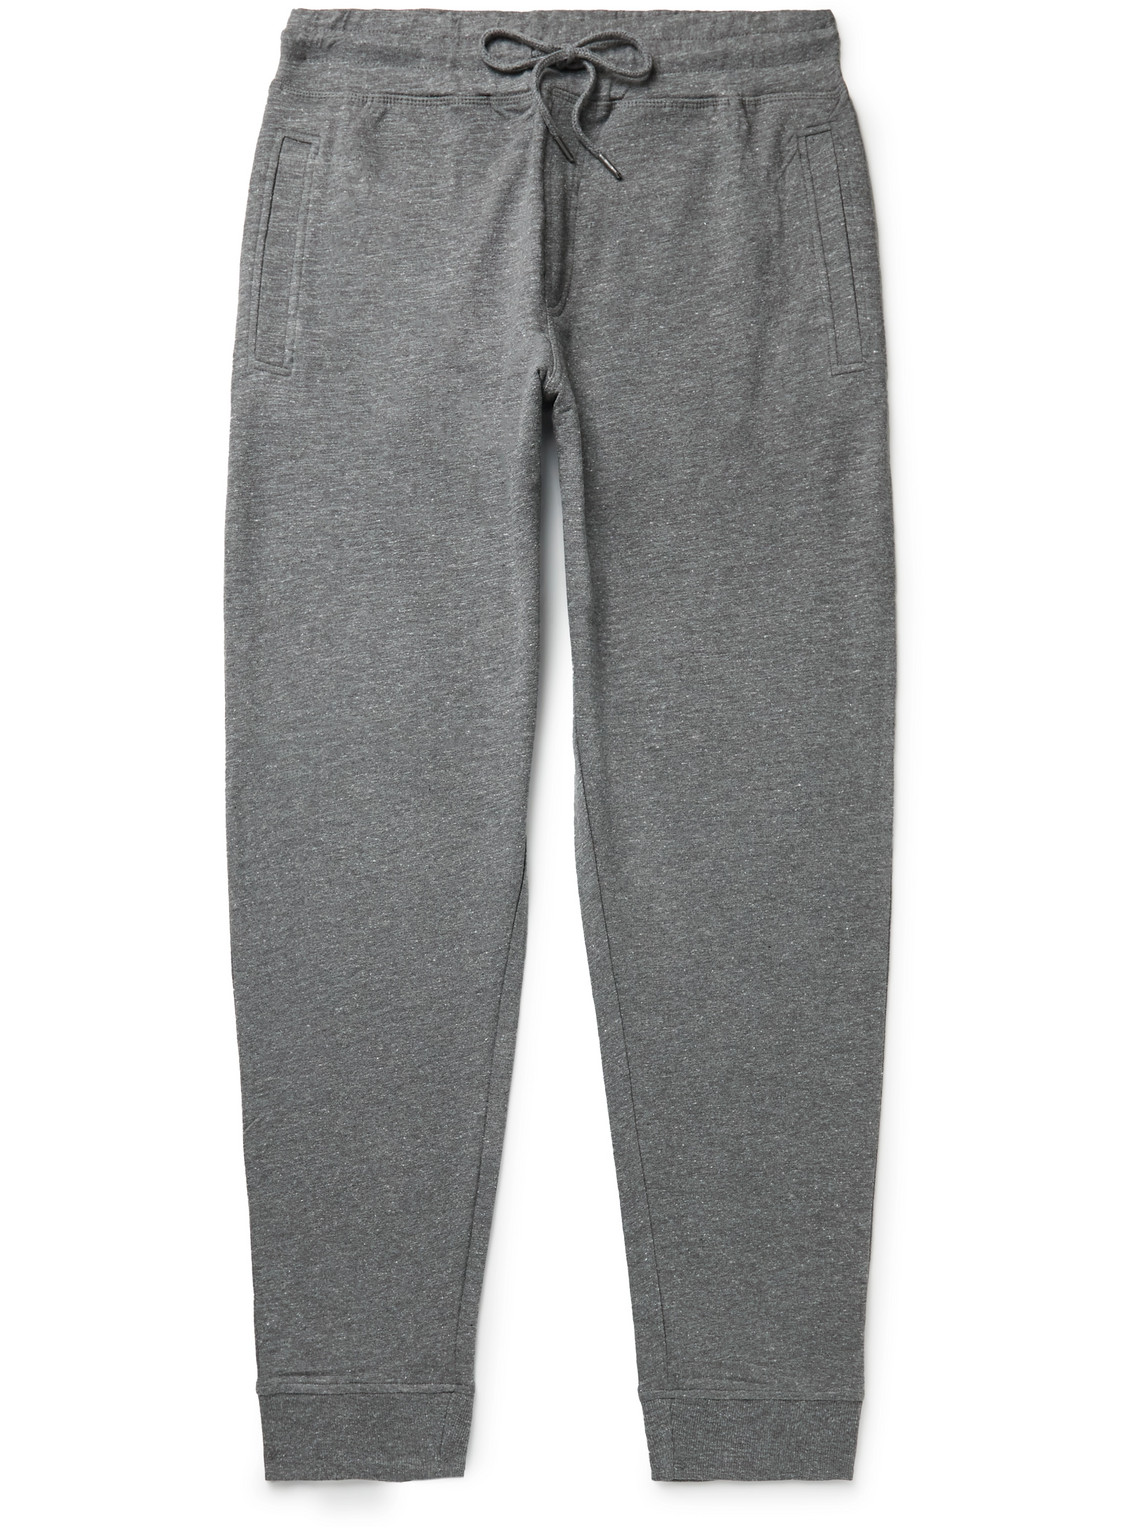 Peter Millar Lava Wash Slim-Fit Tapered Stretch Cotton and Modal-Blend Jersey Sweatpants